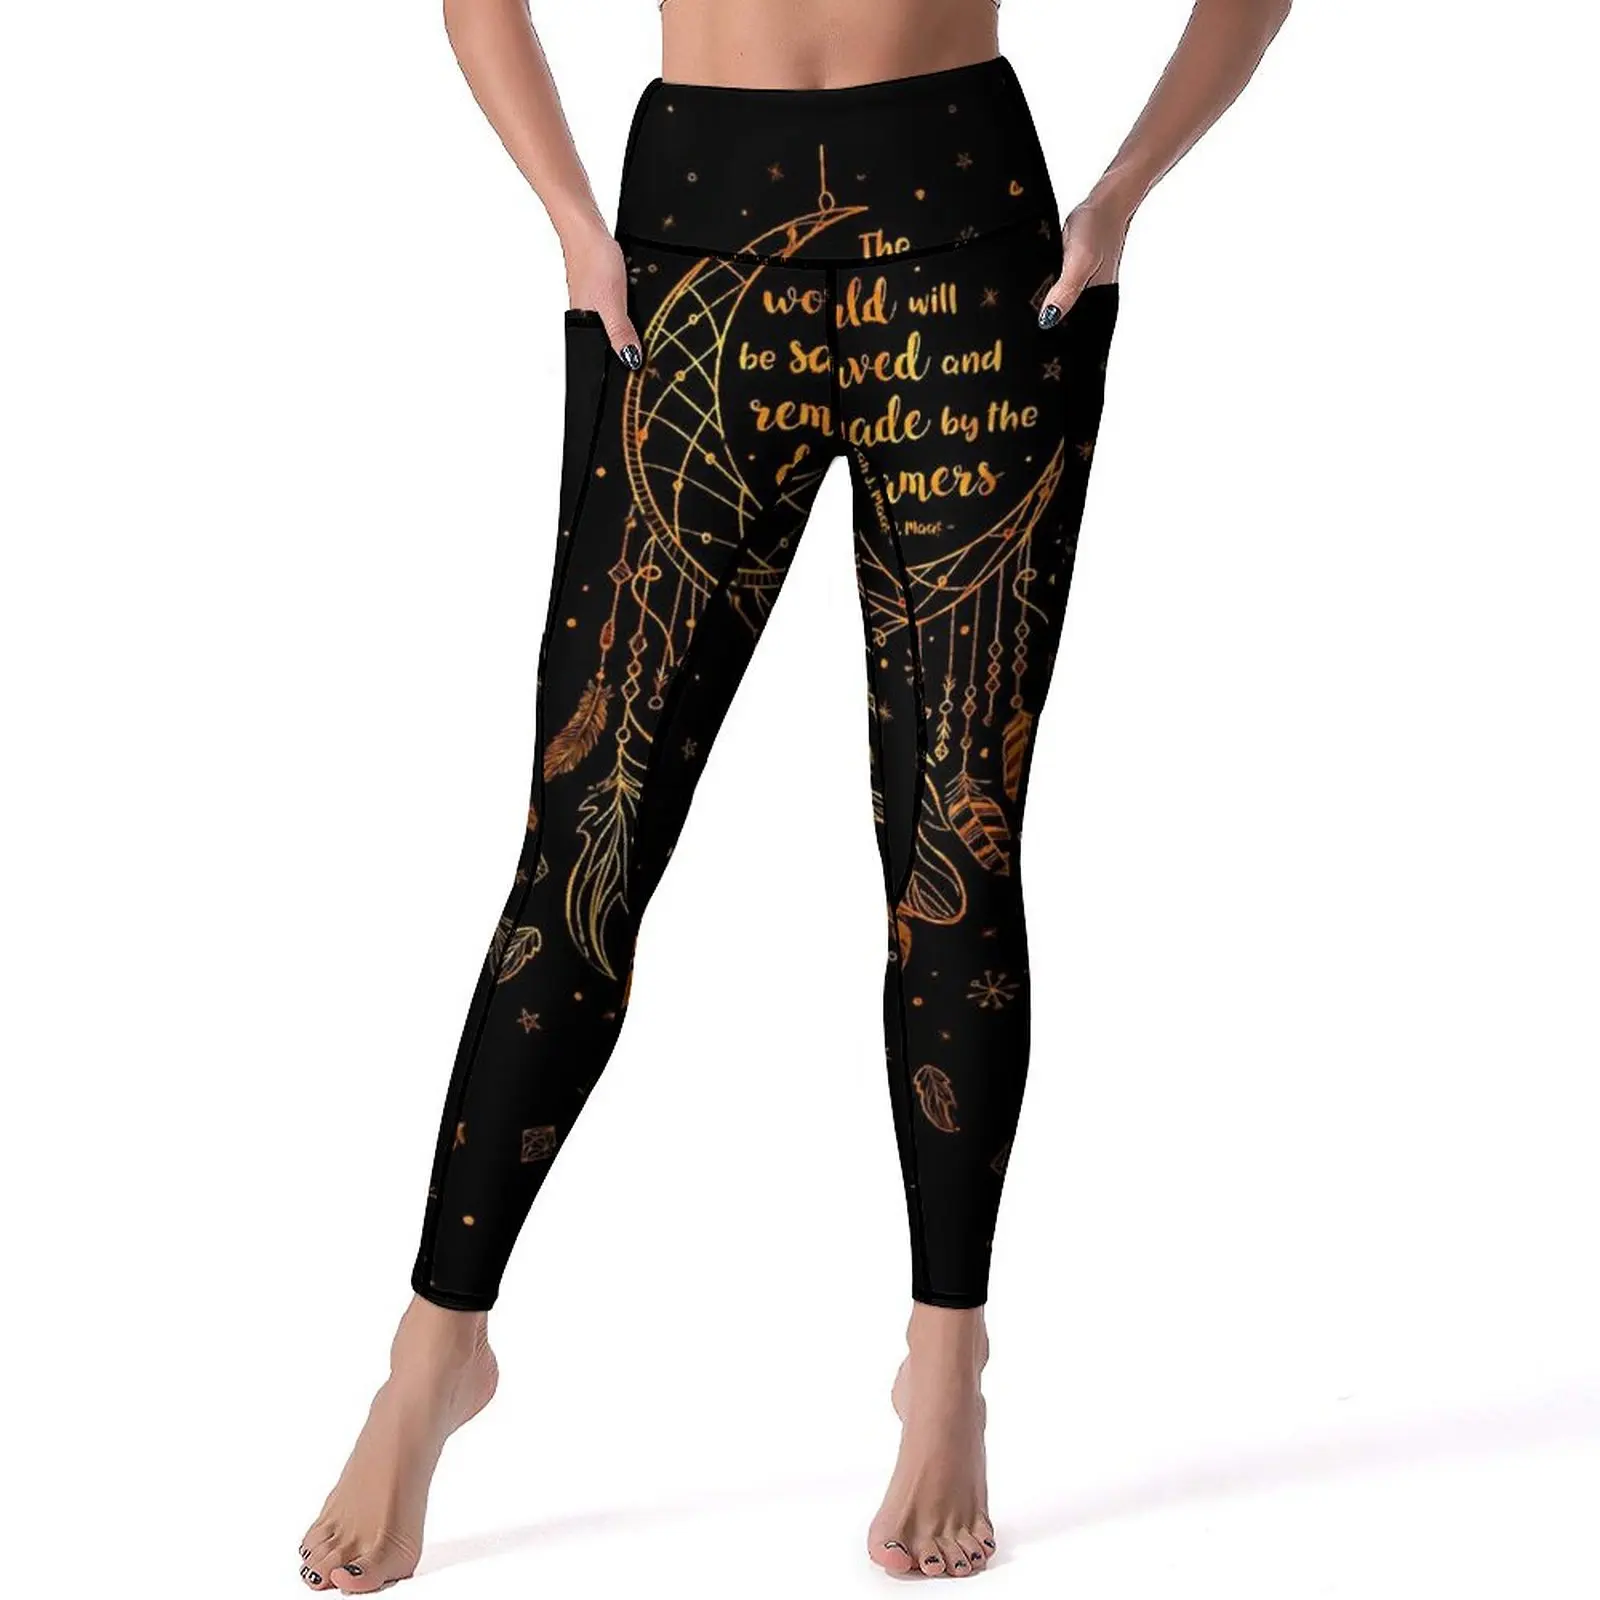 

Dream Catcher Leggings Sexy Saved and Remade Push Up Yoga Pants Sweet Stretch Leggins Female Graphic Workout Sports Tights